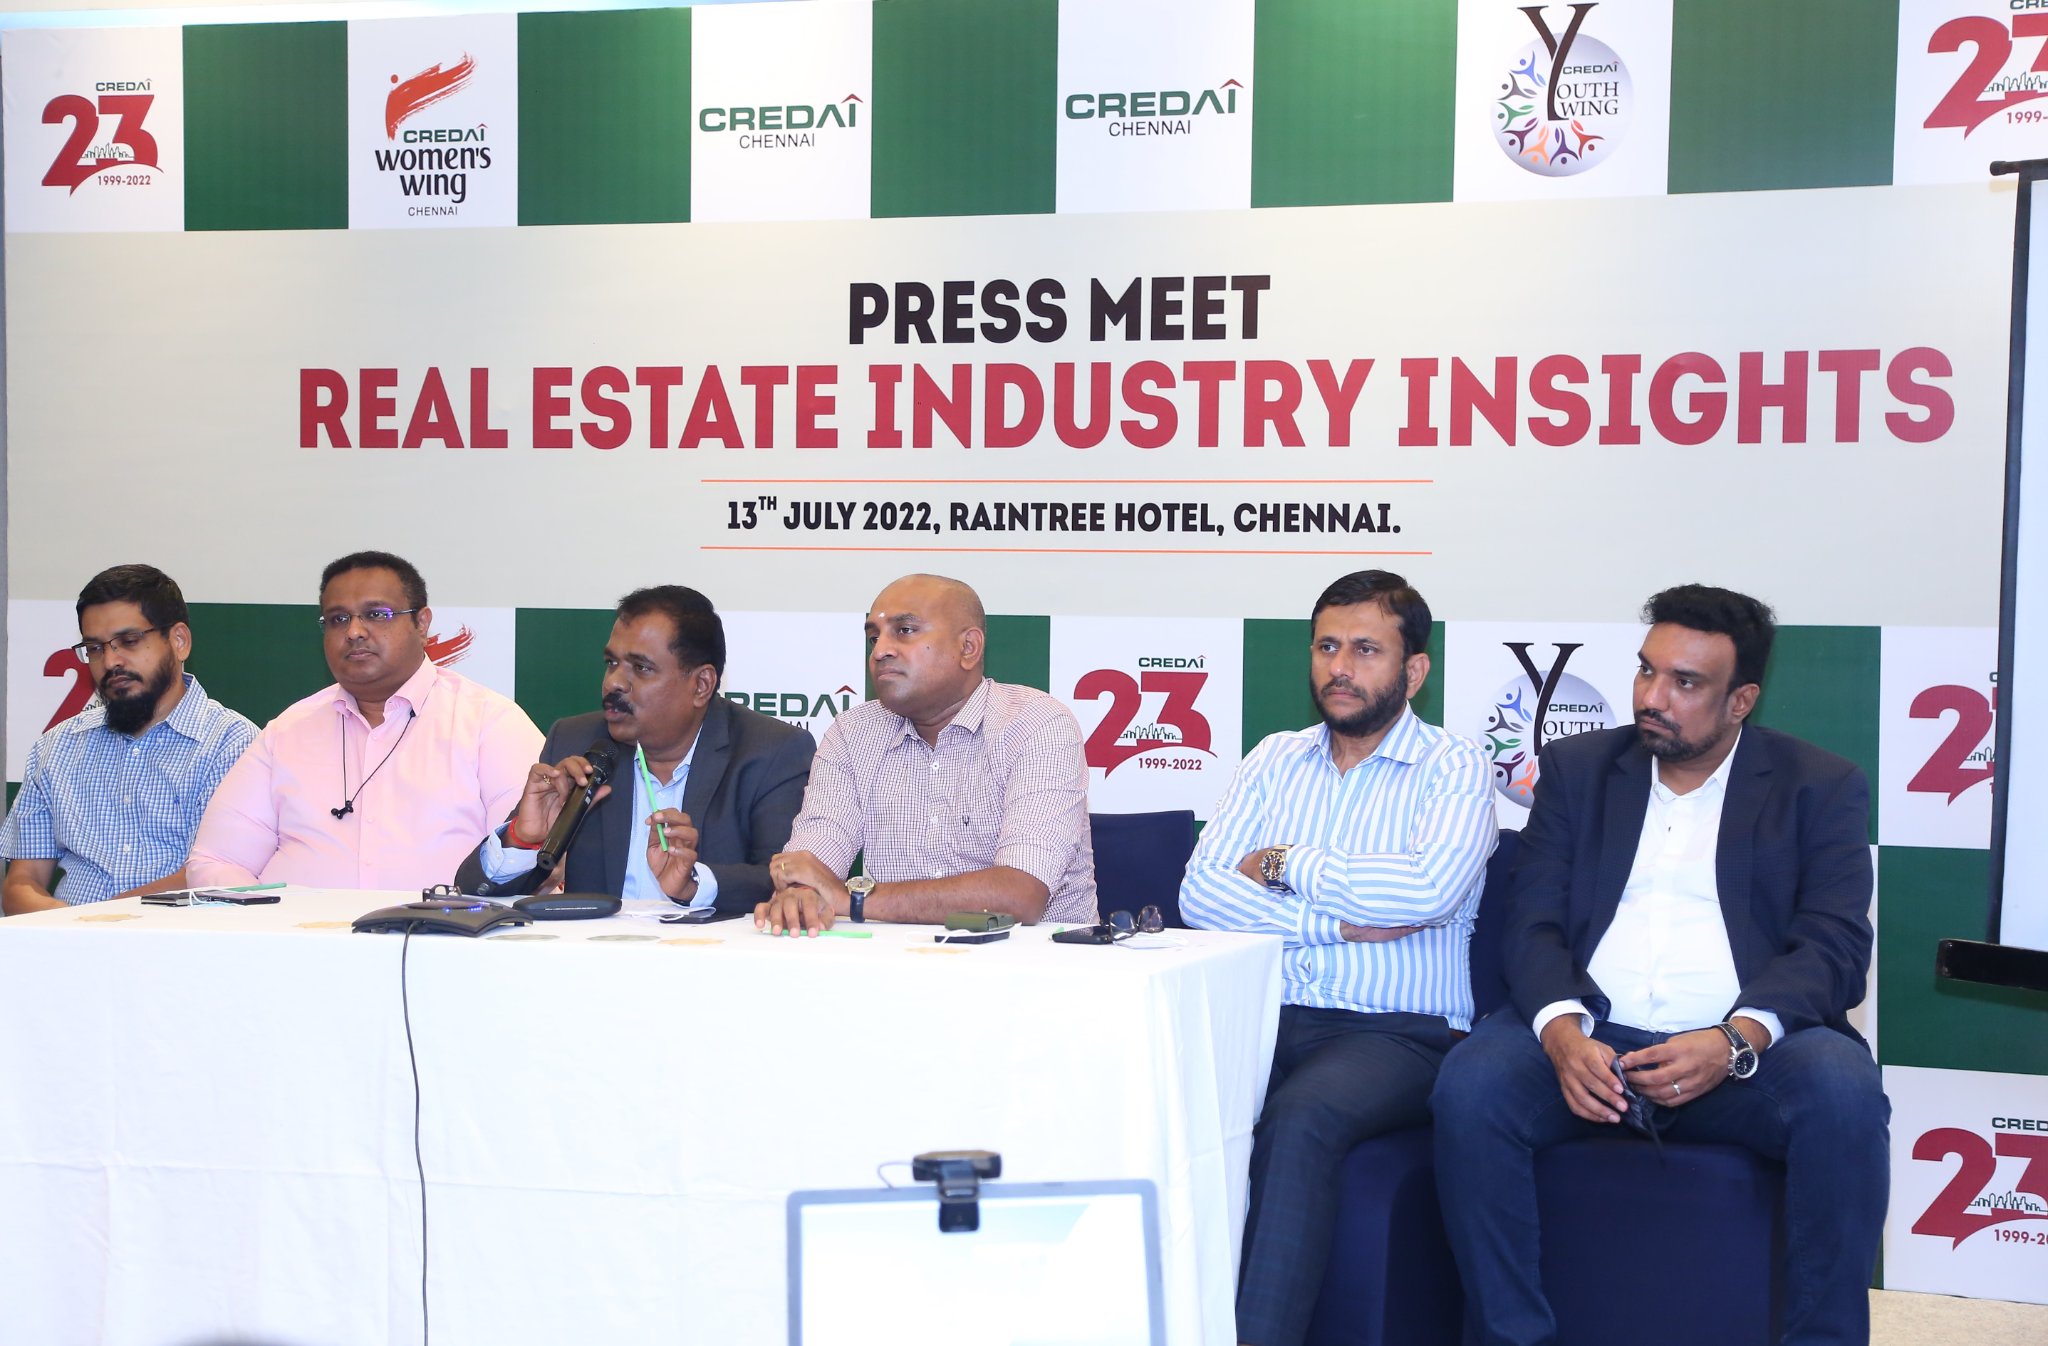 Chennai Real Estate witnesses good demand, it is the right time to buy says CREDAI Chennai